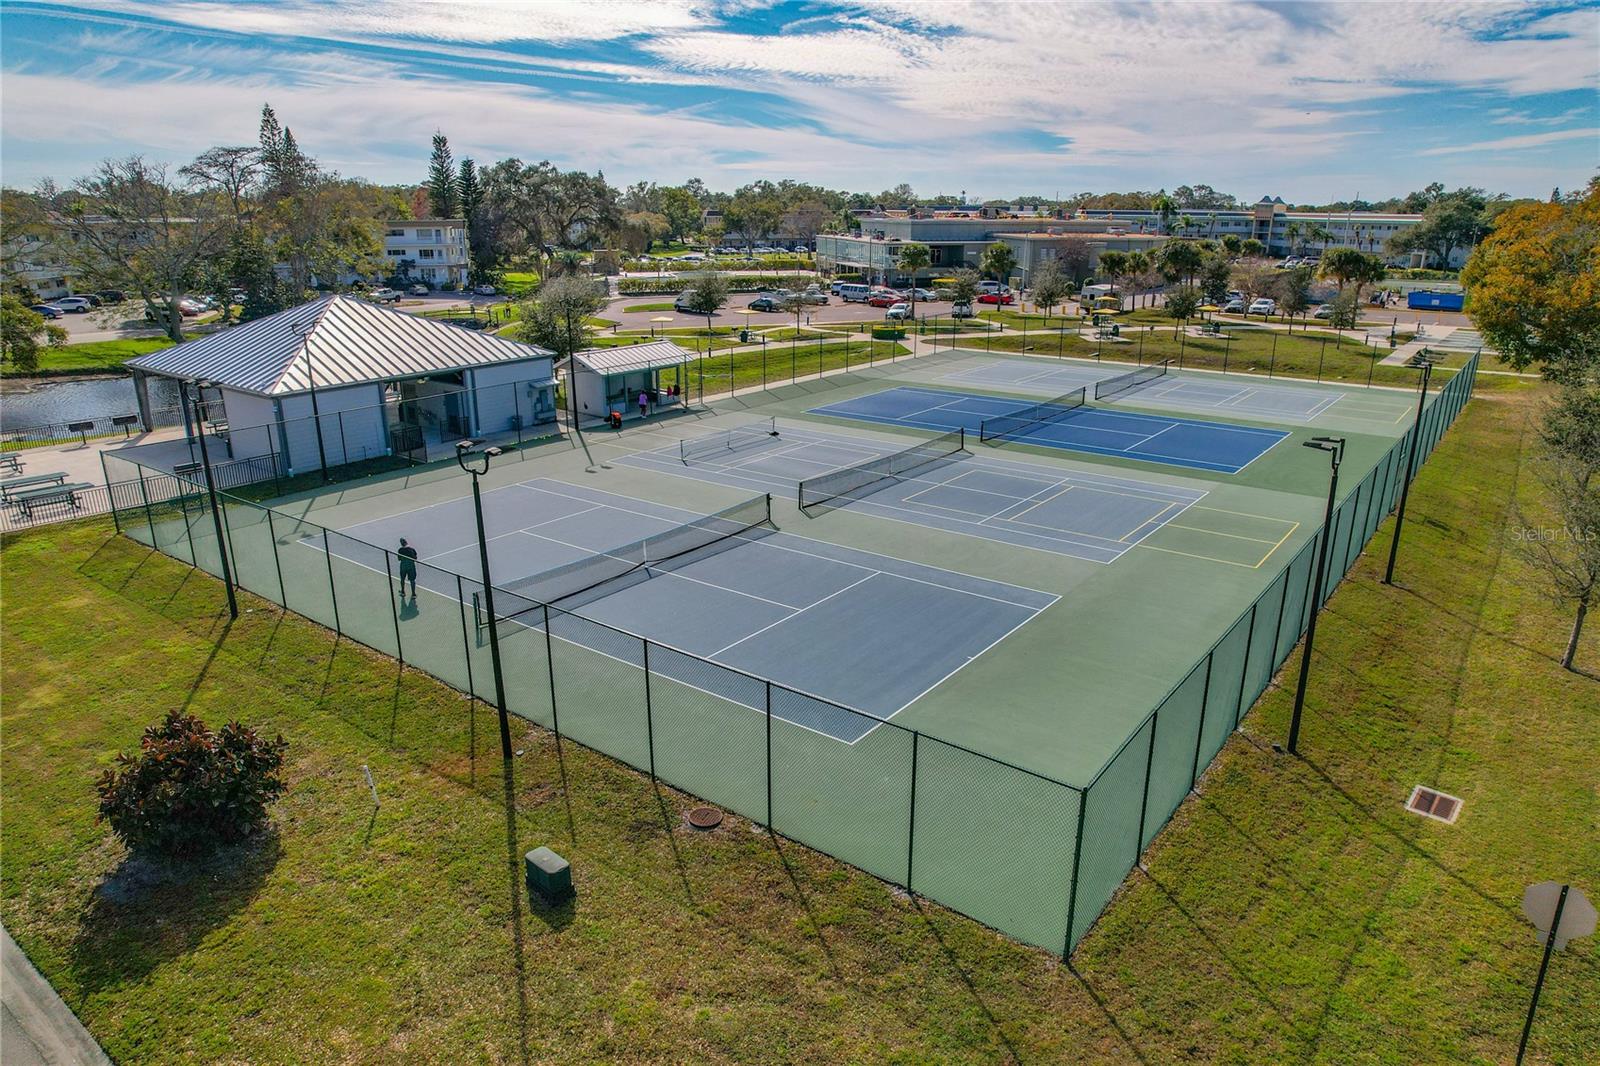 4 TENNIS COURTS IN THE COMMUNITY!